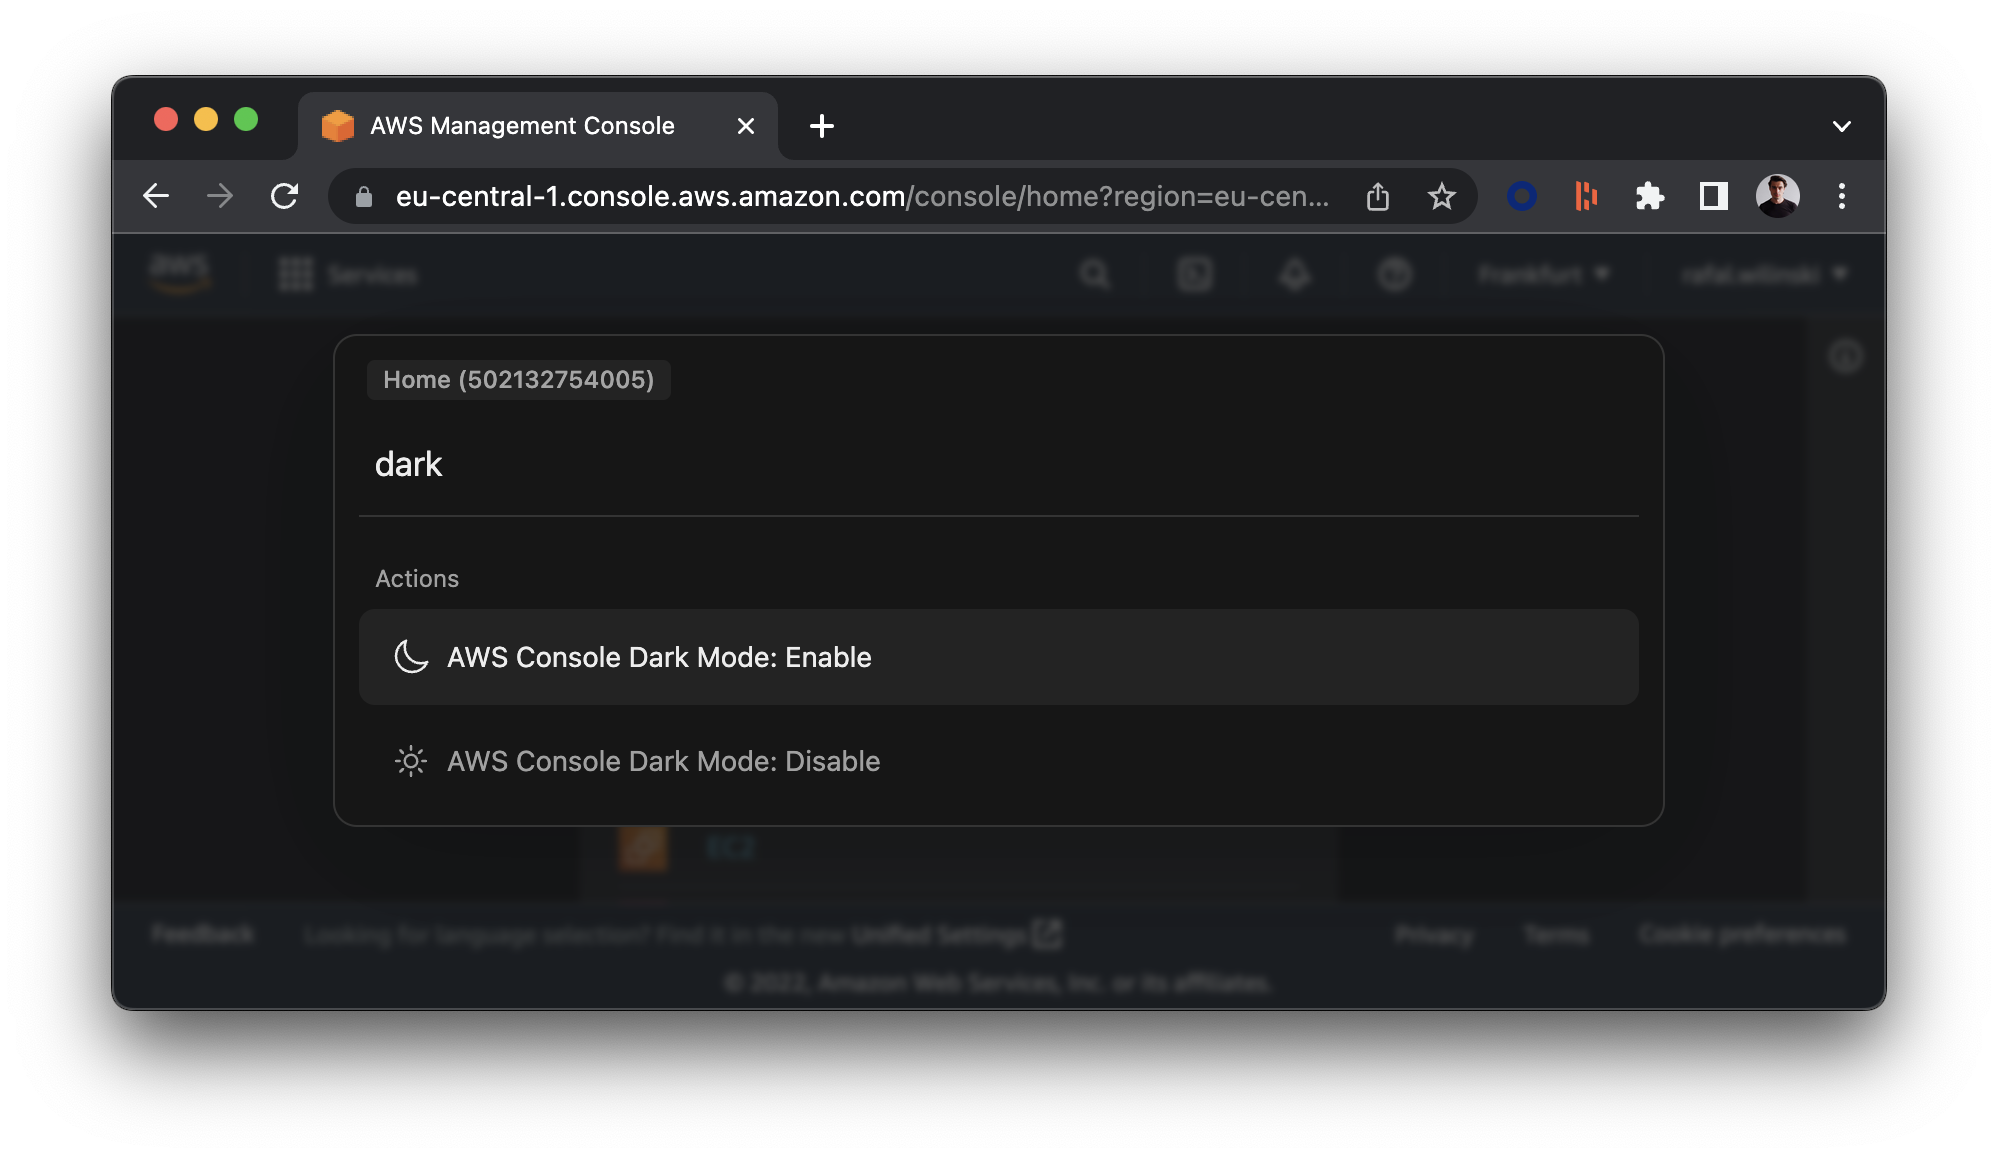 Enabling AWS Console dark mode using CloudTempo